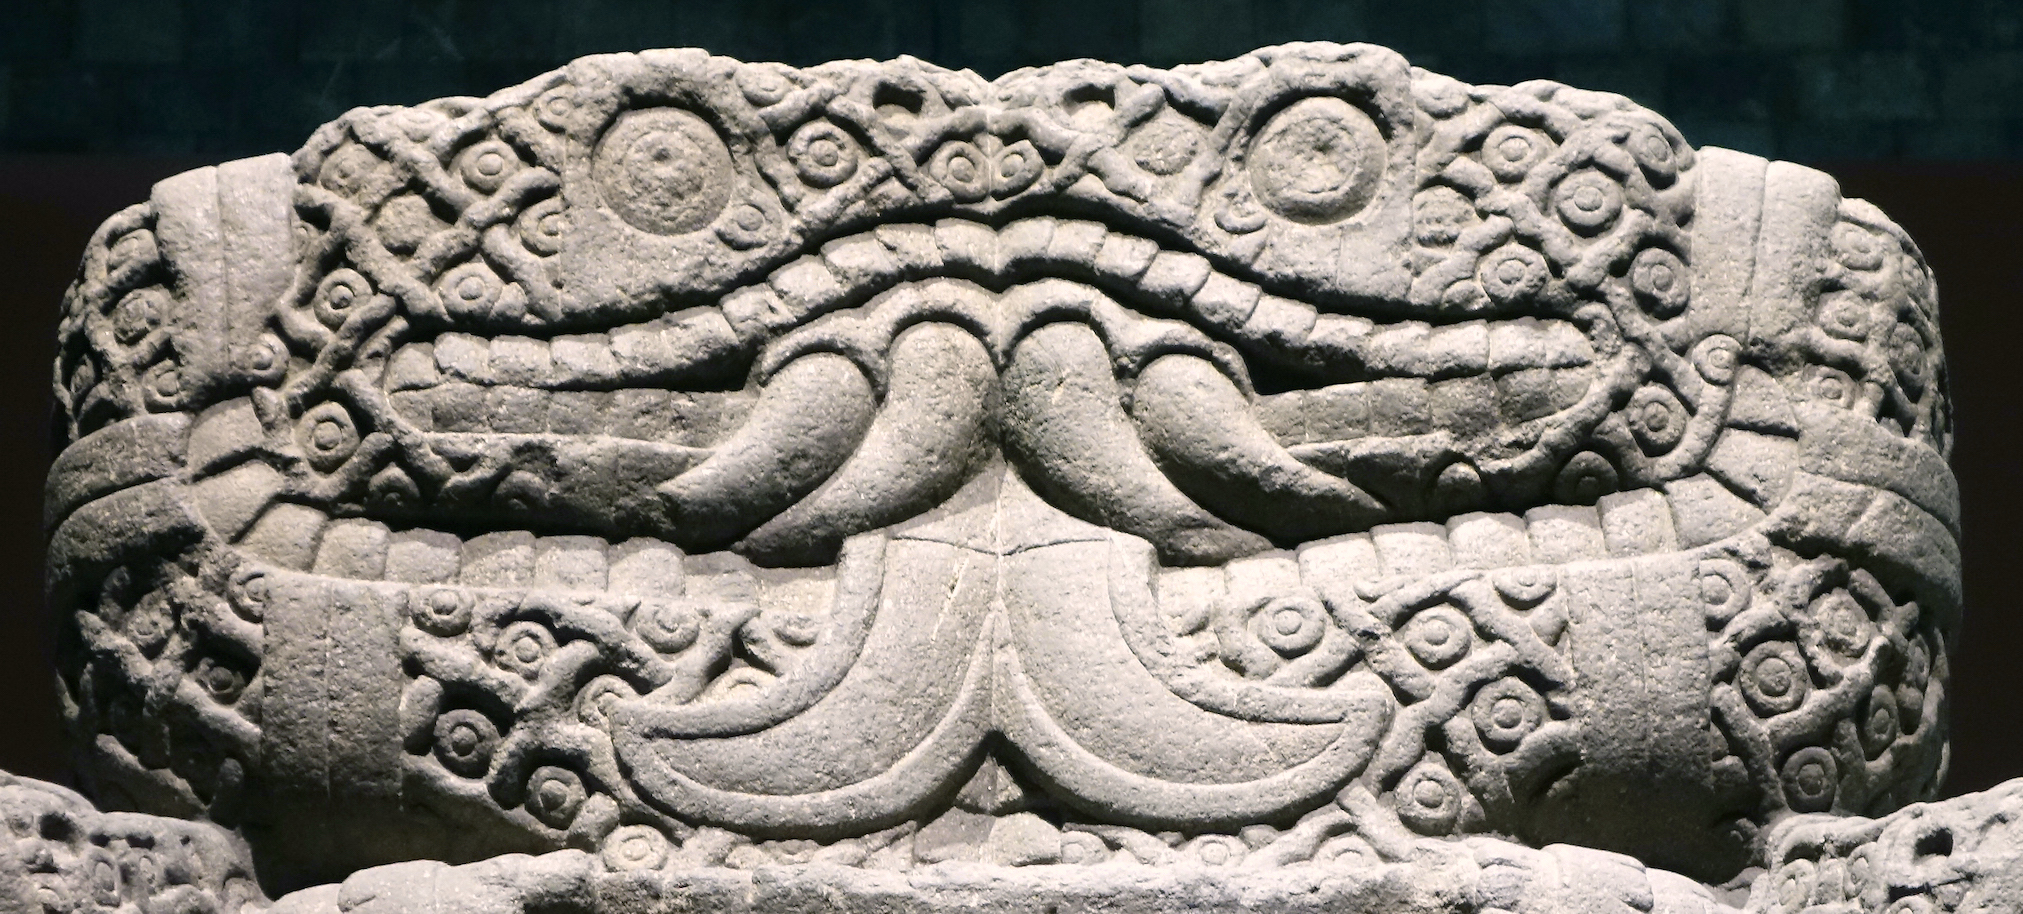 Snakes facing one another (detail), Coatlicue, c. 1500, Mexica (Aztec), found on the SE edge of the Plaza mayor/Zocalo in Mexico City, basalt, 257 cm high (National Museum of Anthropology, Mexico City; photo: Steven Zucker, CC BY-NC-SA 2.0)